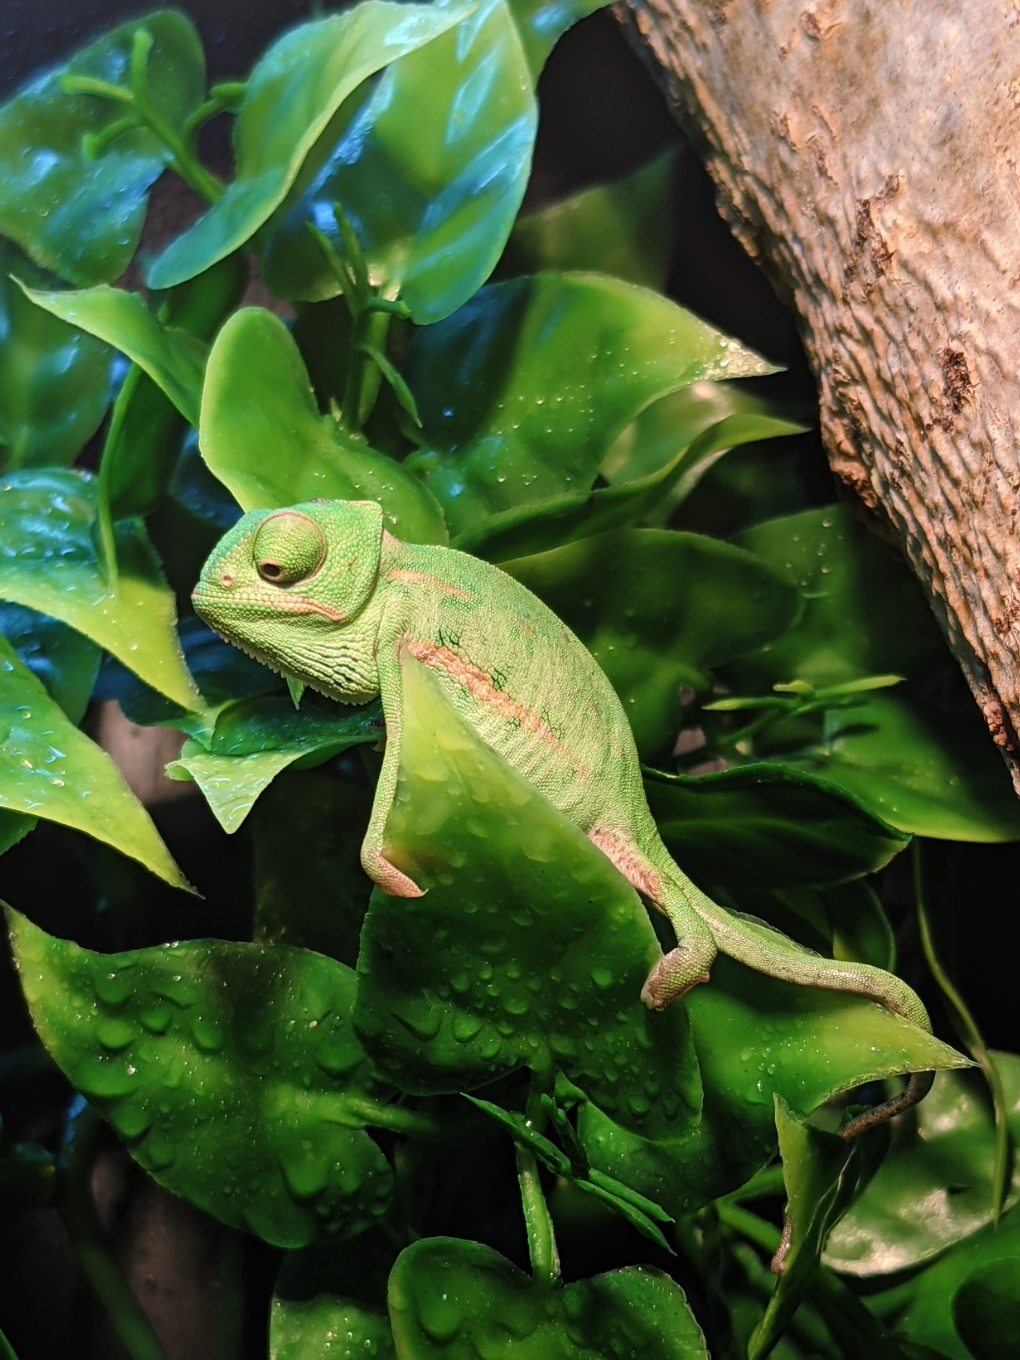 Close-up photograph of a green Yemen/veiled chameleon, resting on some large wet leaves